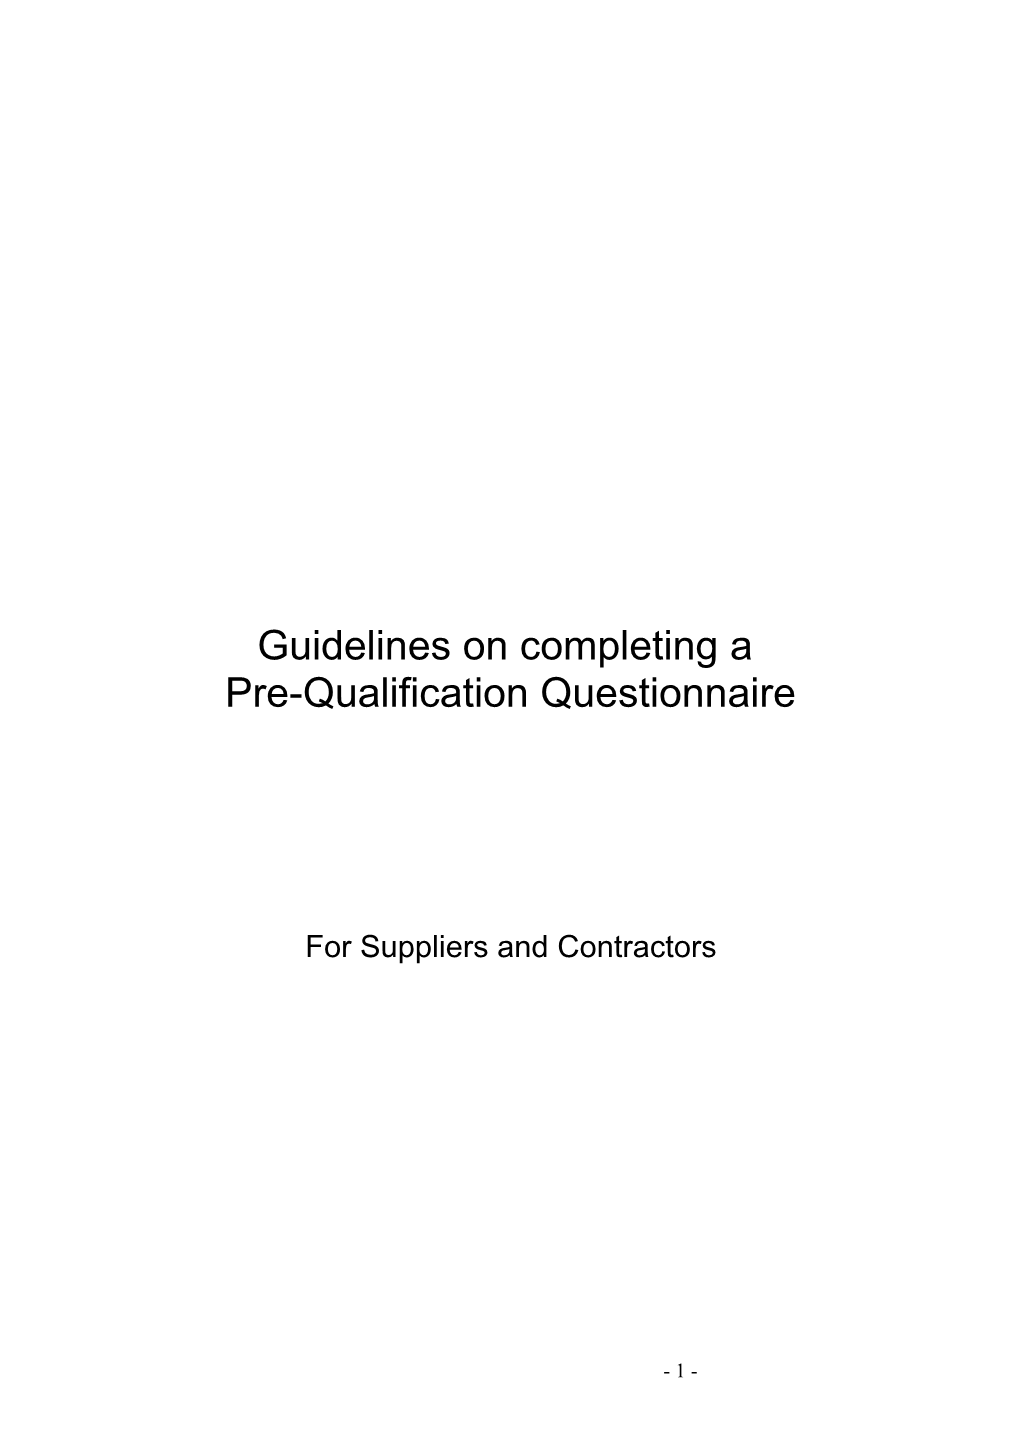 Guidelines on Completing A